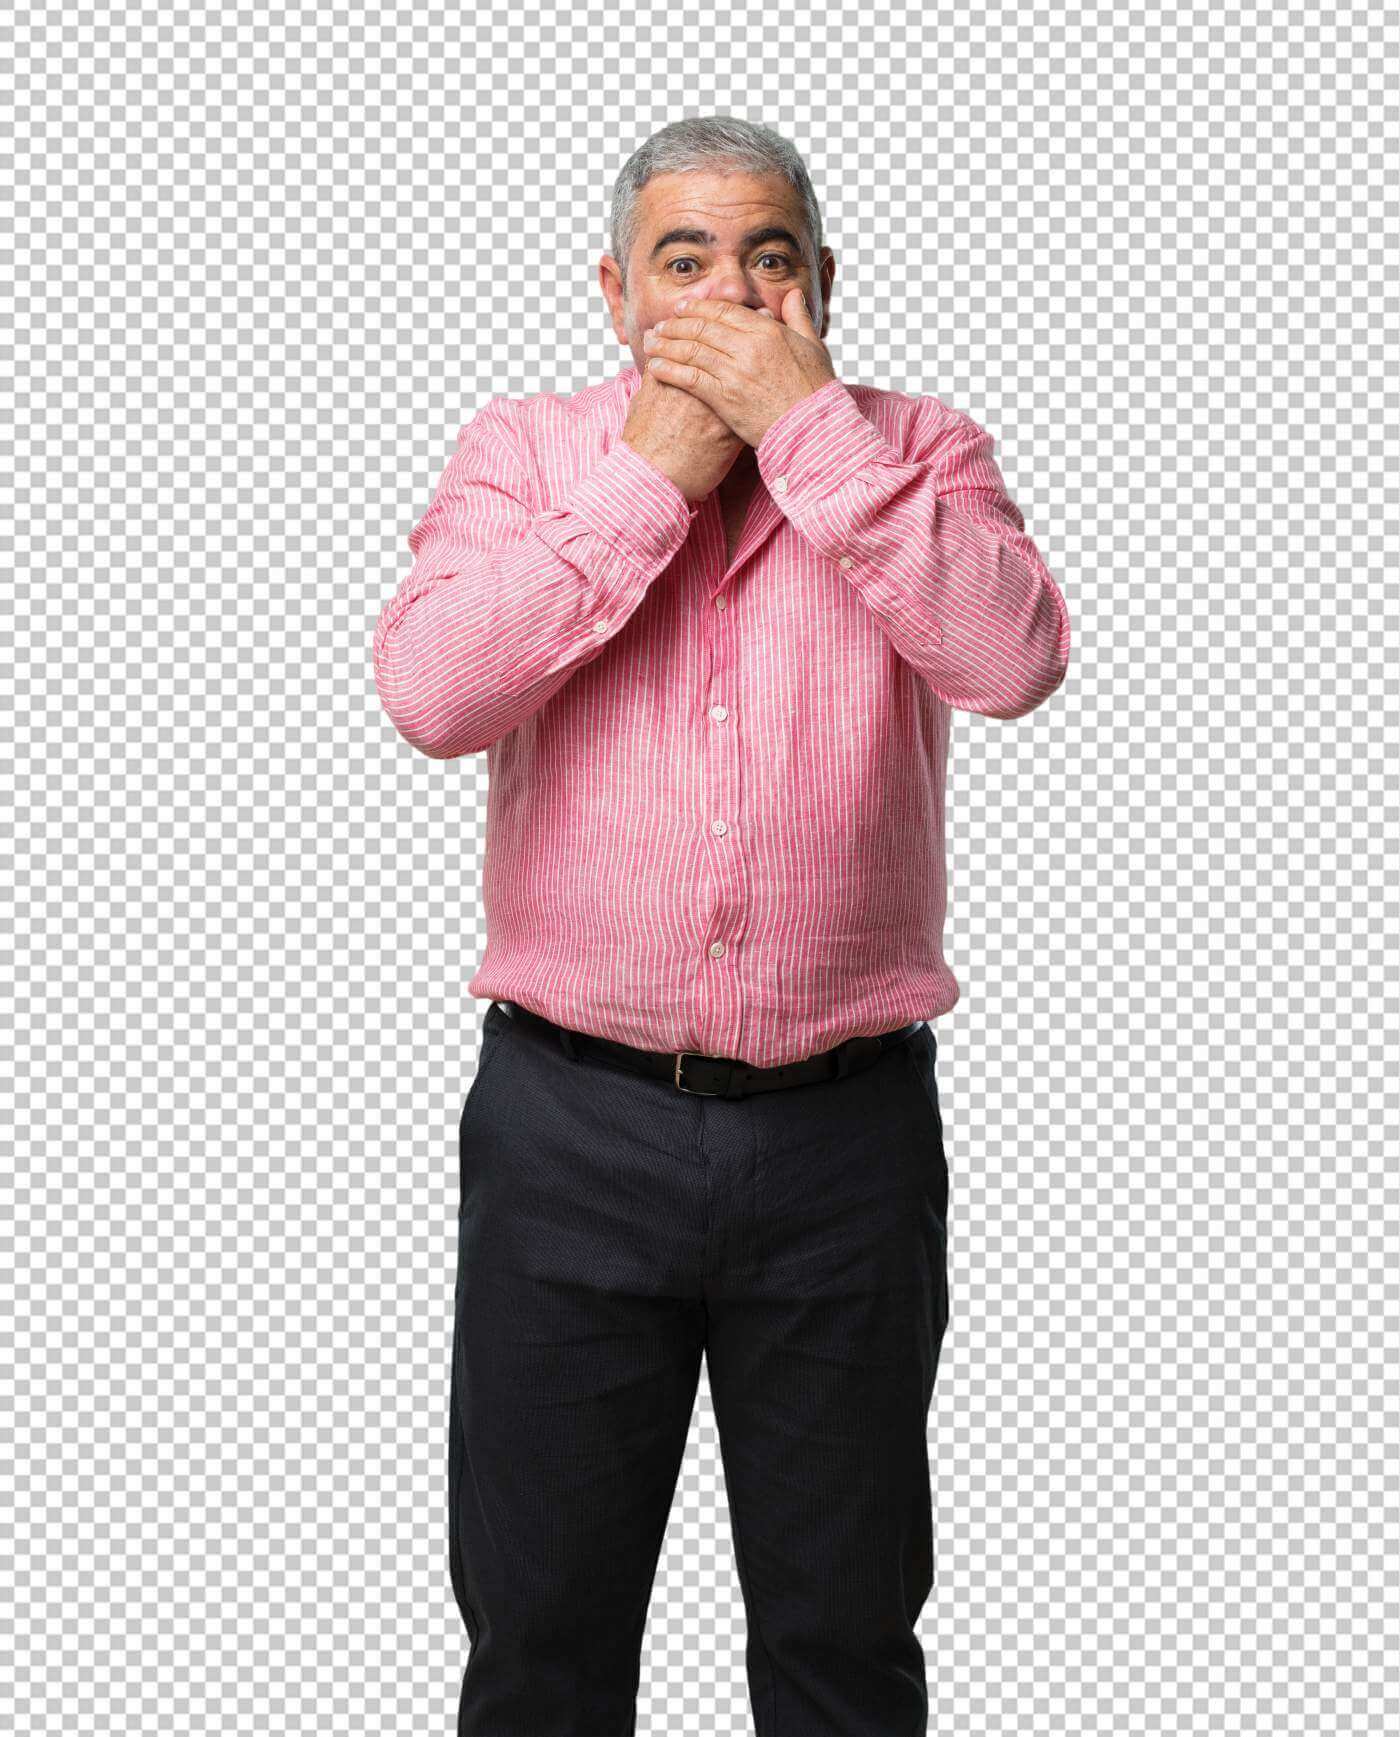 Middle aged man covering mouth